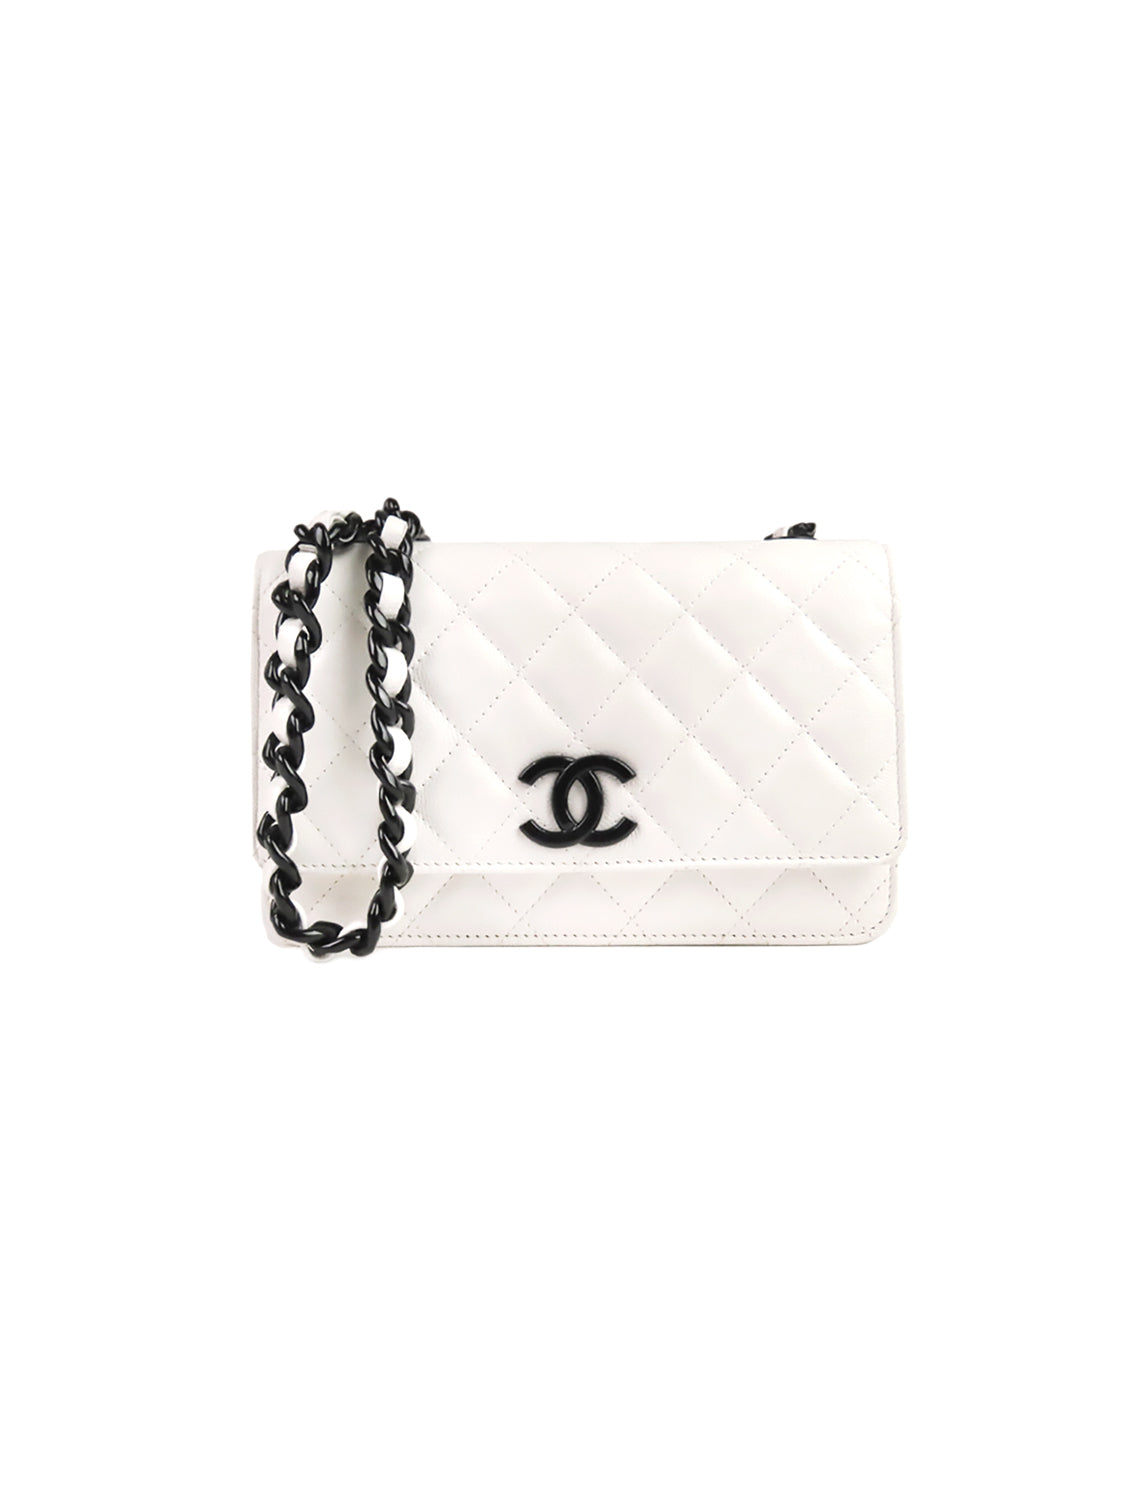 Chanel 2020 White and Black Leather Flap Bag